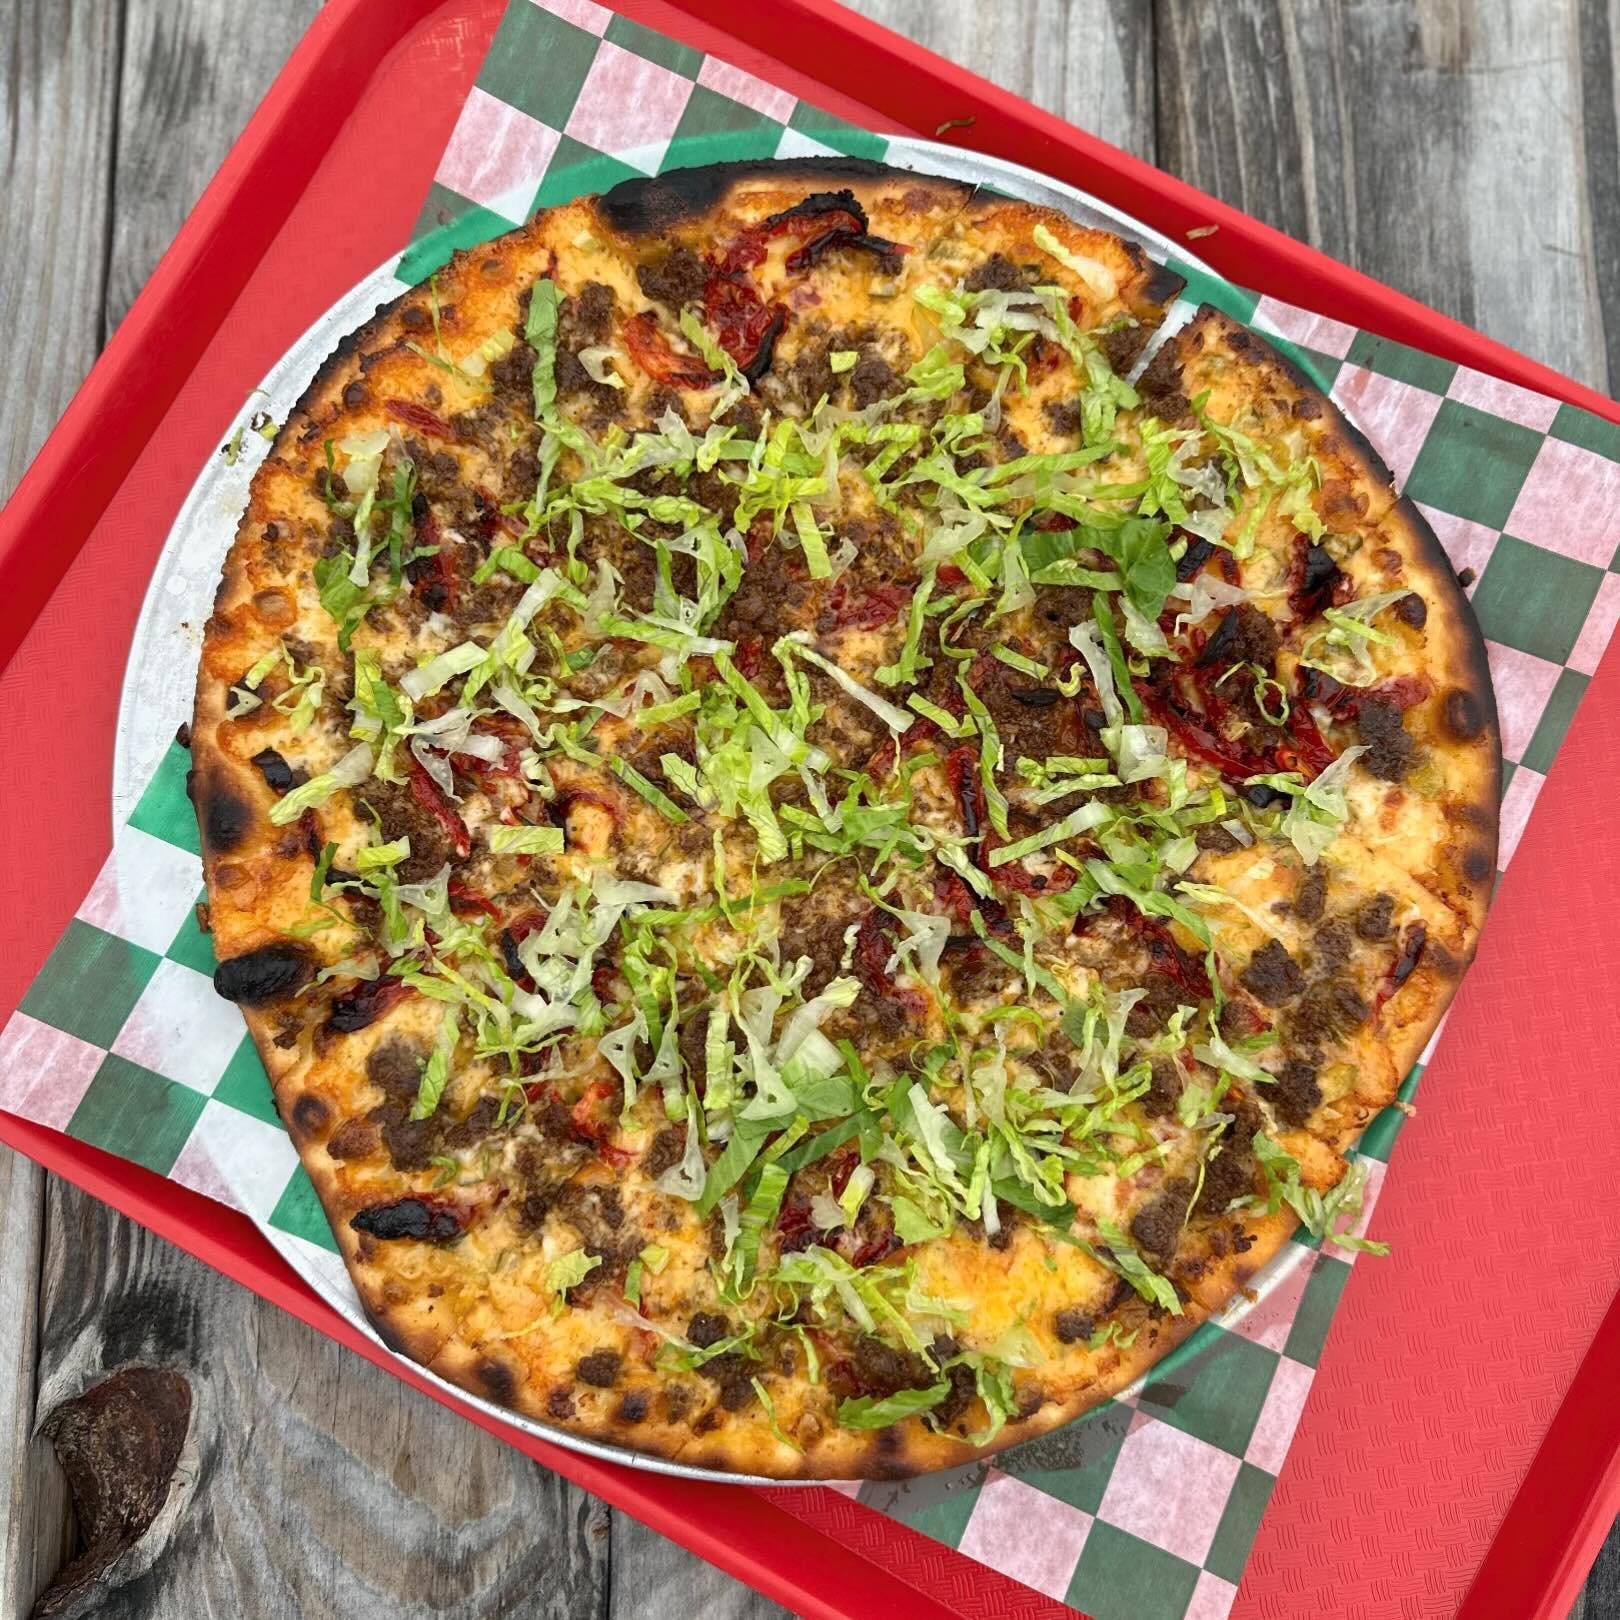 We thought it would be fun to collab with our sister location @rockwellbeercompany - drumroll please&hellip;. The Cheeseburger 🍔 Pizza 🍕 
Thousand island
Cheddar Cheese
Steakburger seasoned ground beef
Tomato 
Lettuce- while supplies last